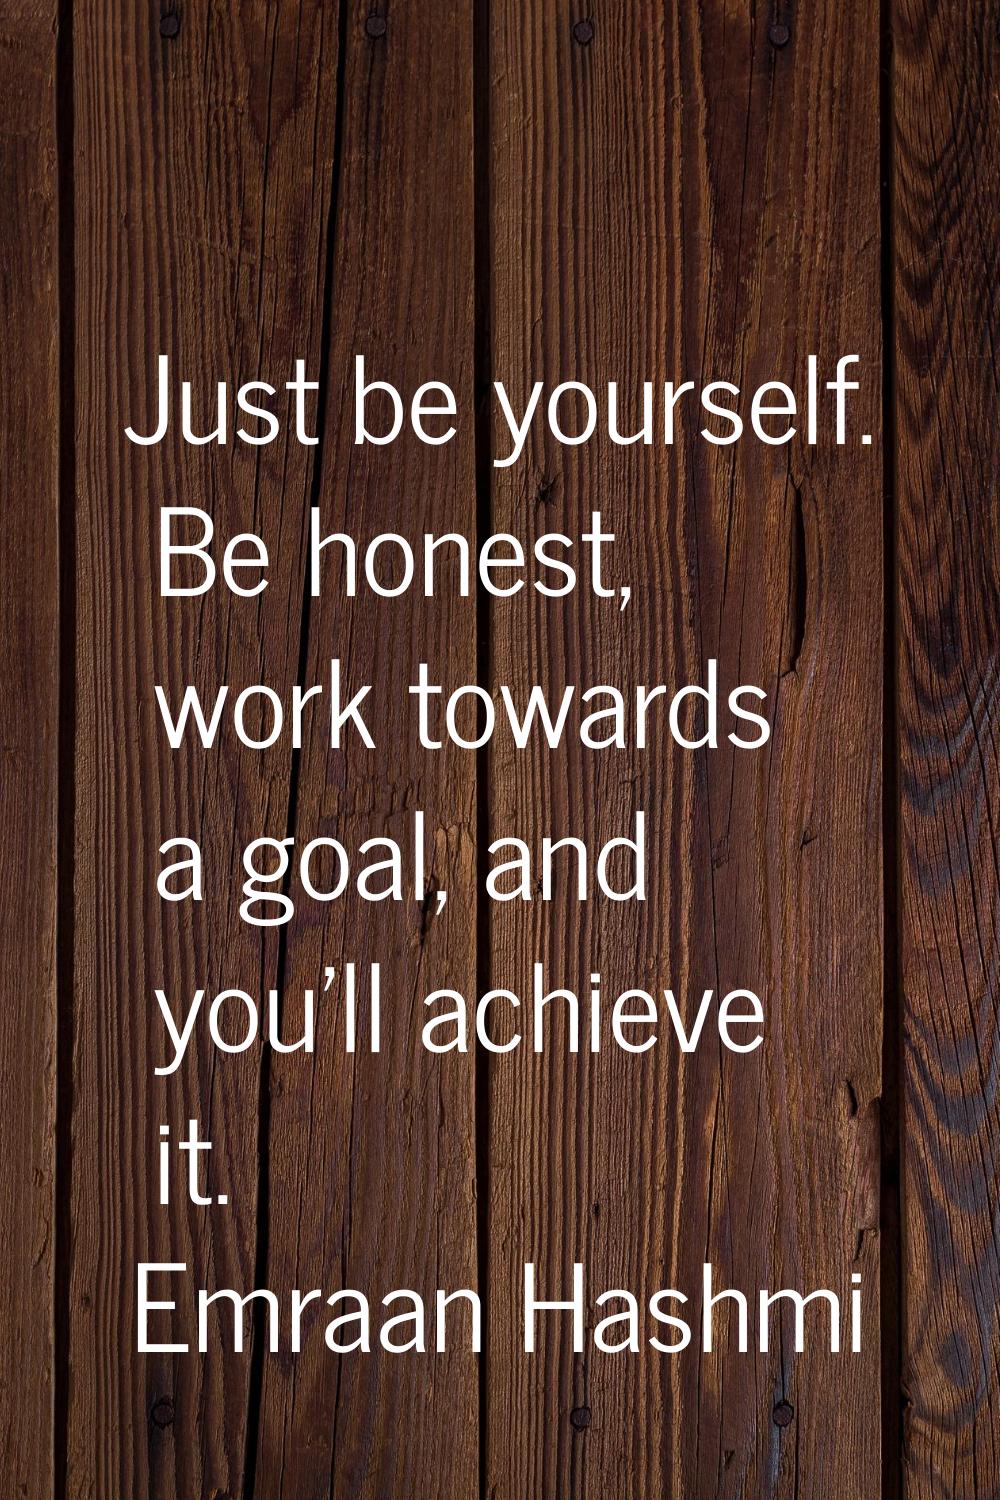 Just be yourself. Be honest, work towards a goal, and you'll achieve it.